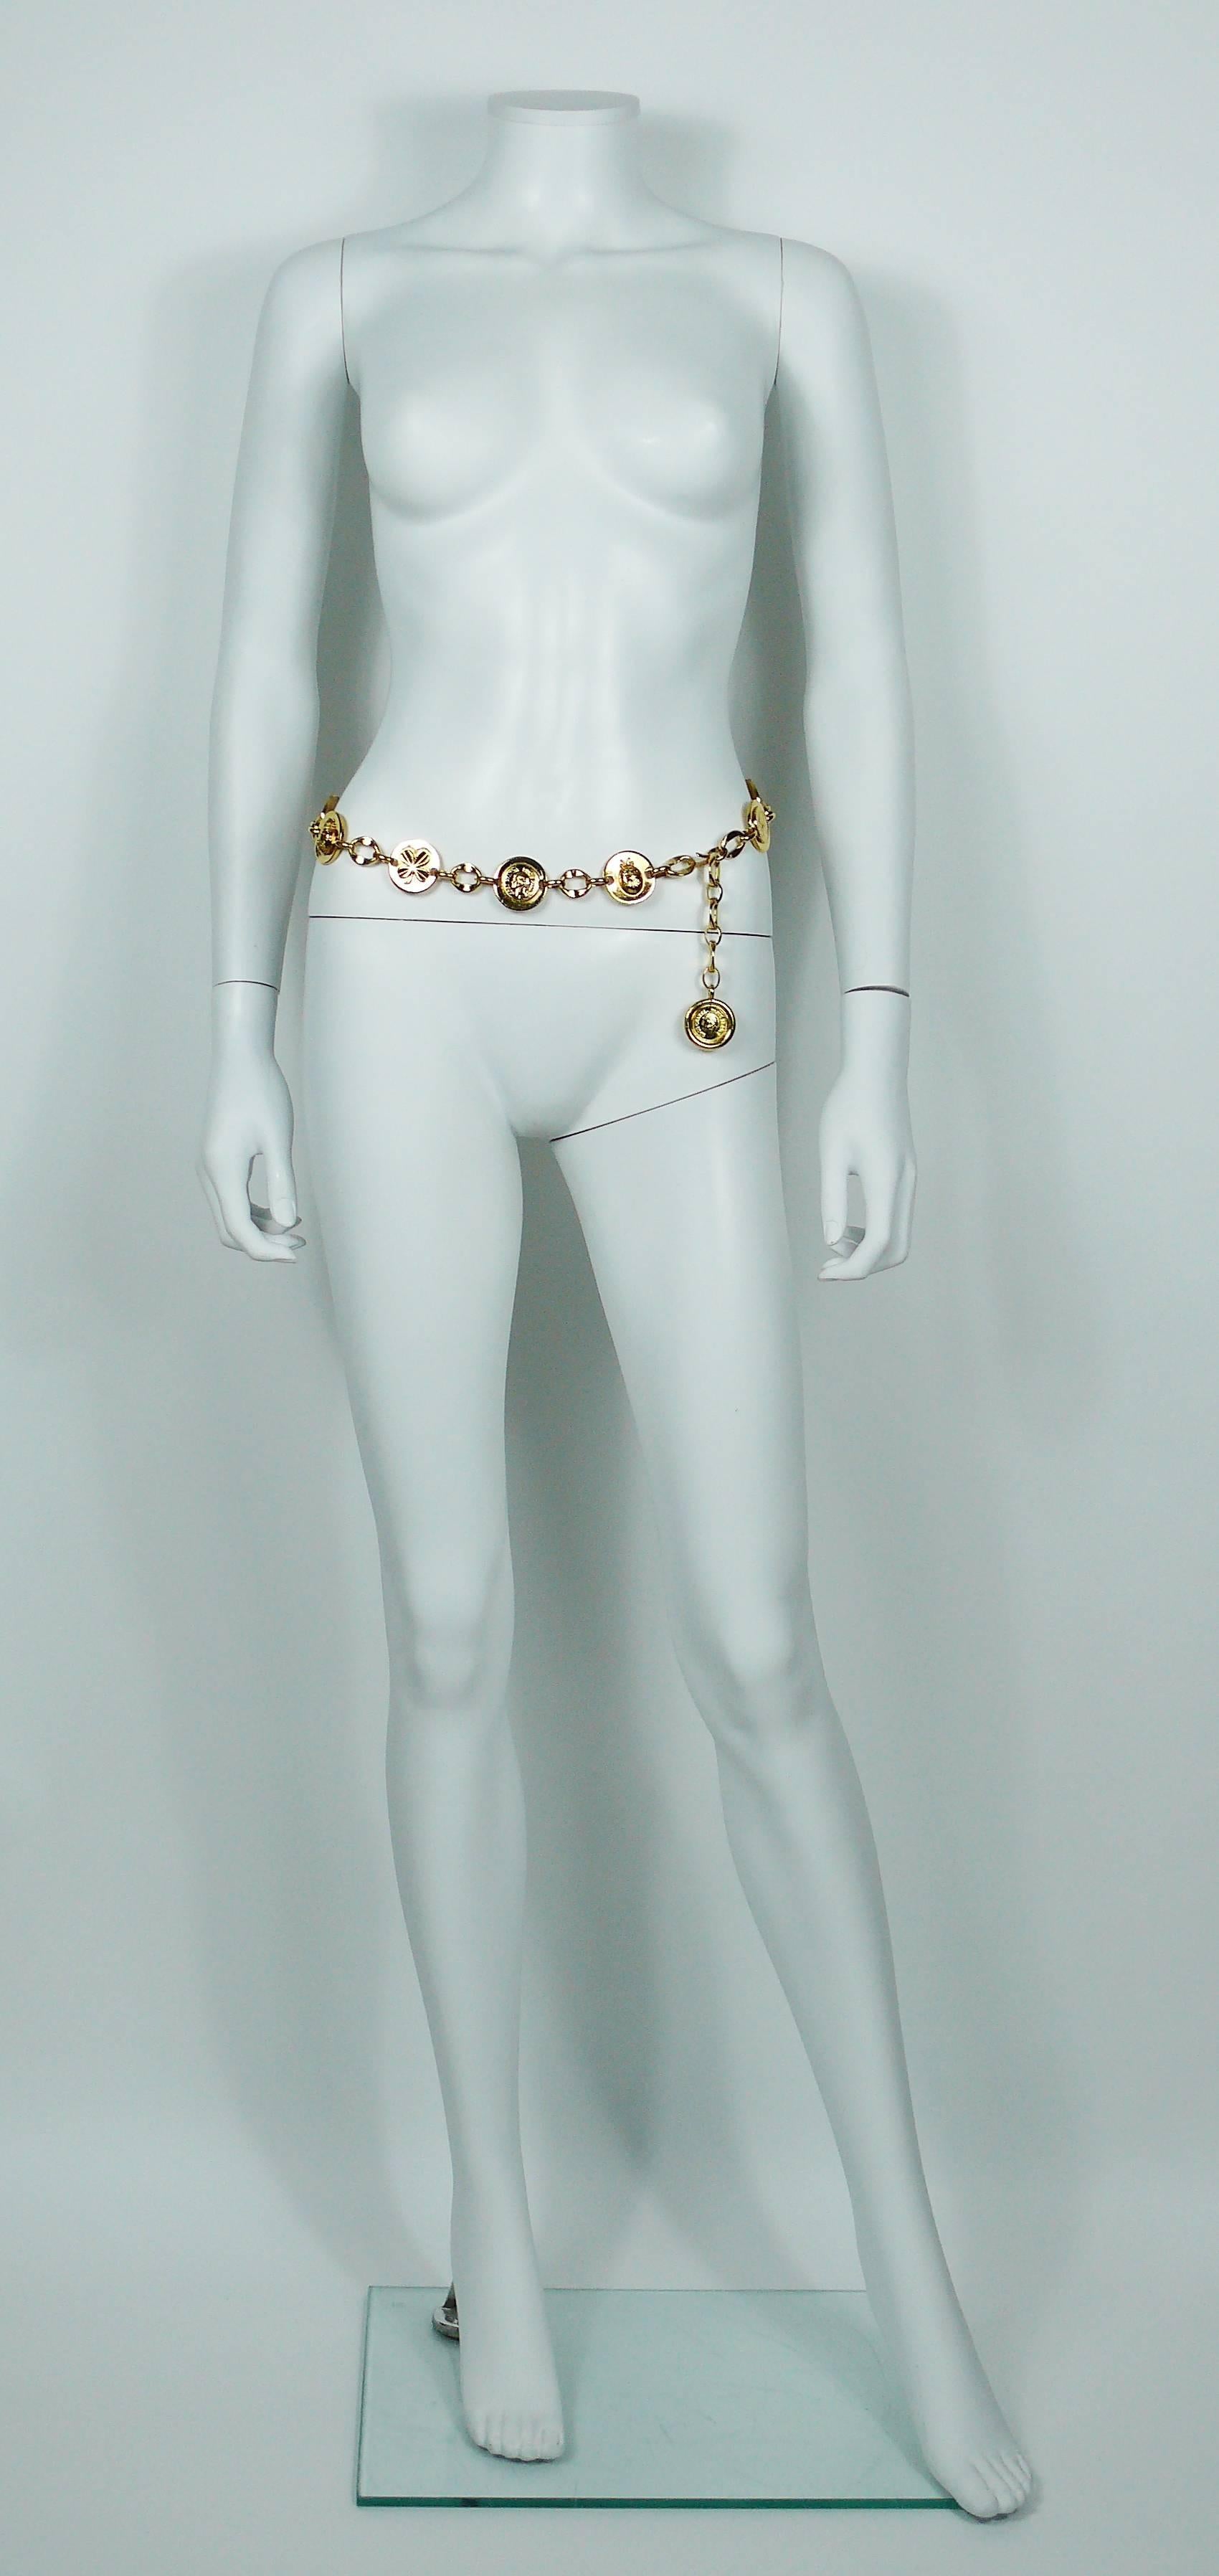 CHANEL vintage gold toned chain belt featuring some iconic symbols of the House : ladybug, clover and Mademoiselle profile.

Similar model worn at CHANEL Haute Couture 1986 Spring-Summer runway show. Bibliography : 